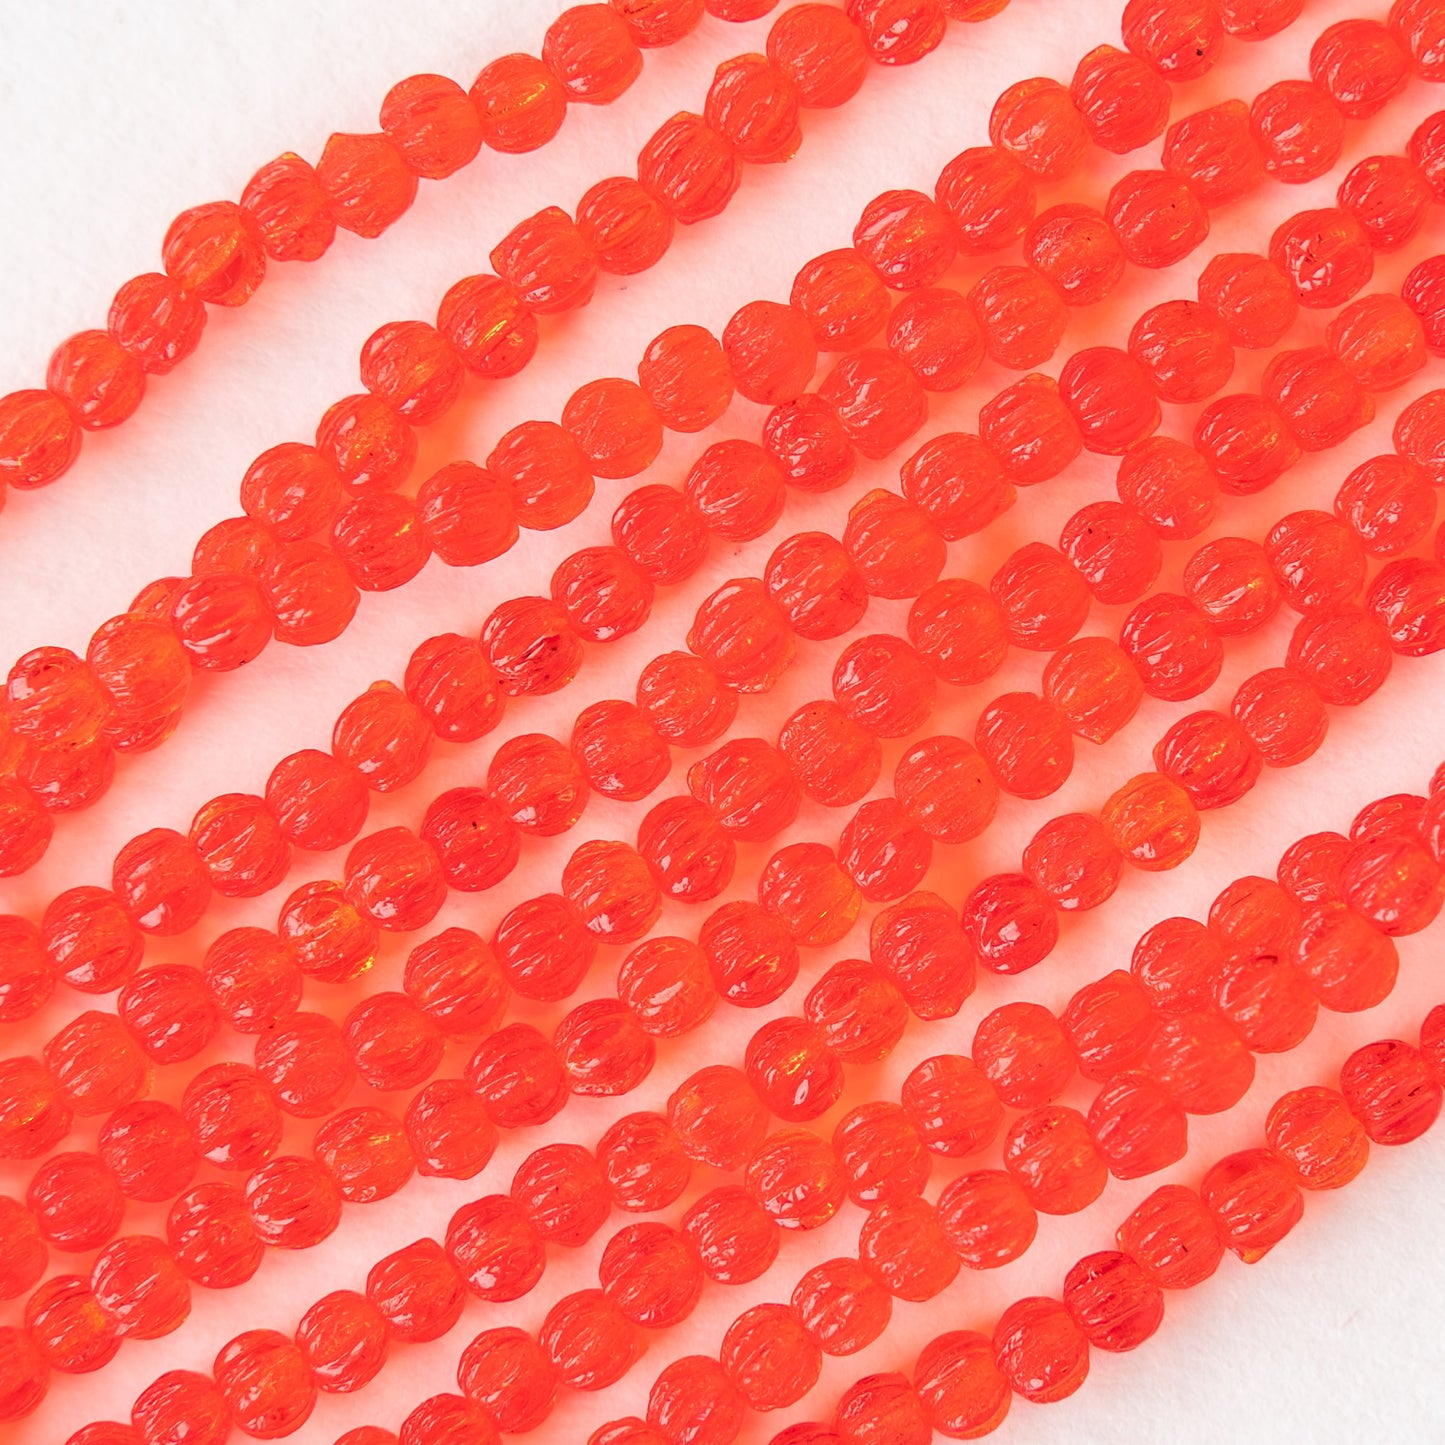 Load image into Gallery viewer, 3mm Glass Melon Beads - Orange Hyacinth - 100 Beads
